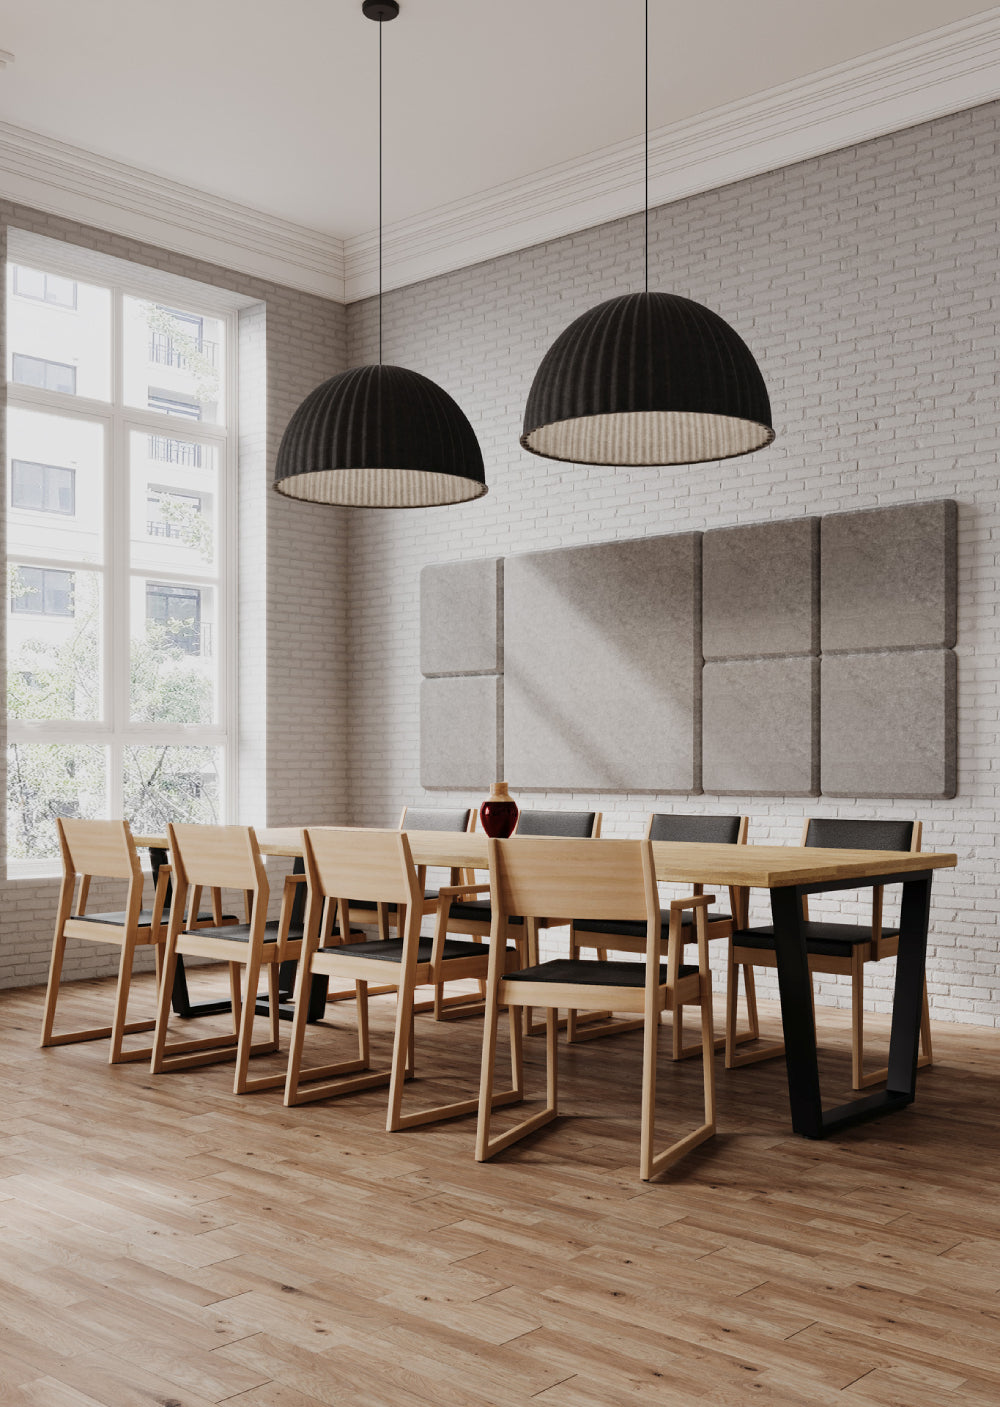 Woodbe Dining Wooden Armchair with Wall Panel and Ceiling Light in Dining Setting